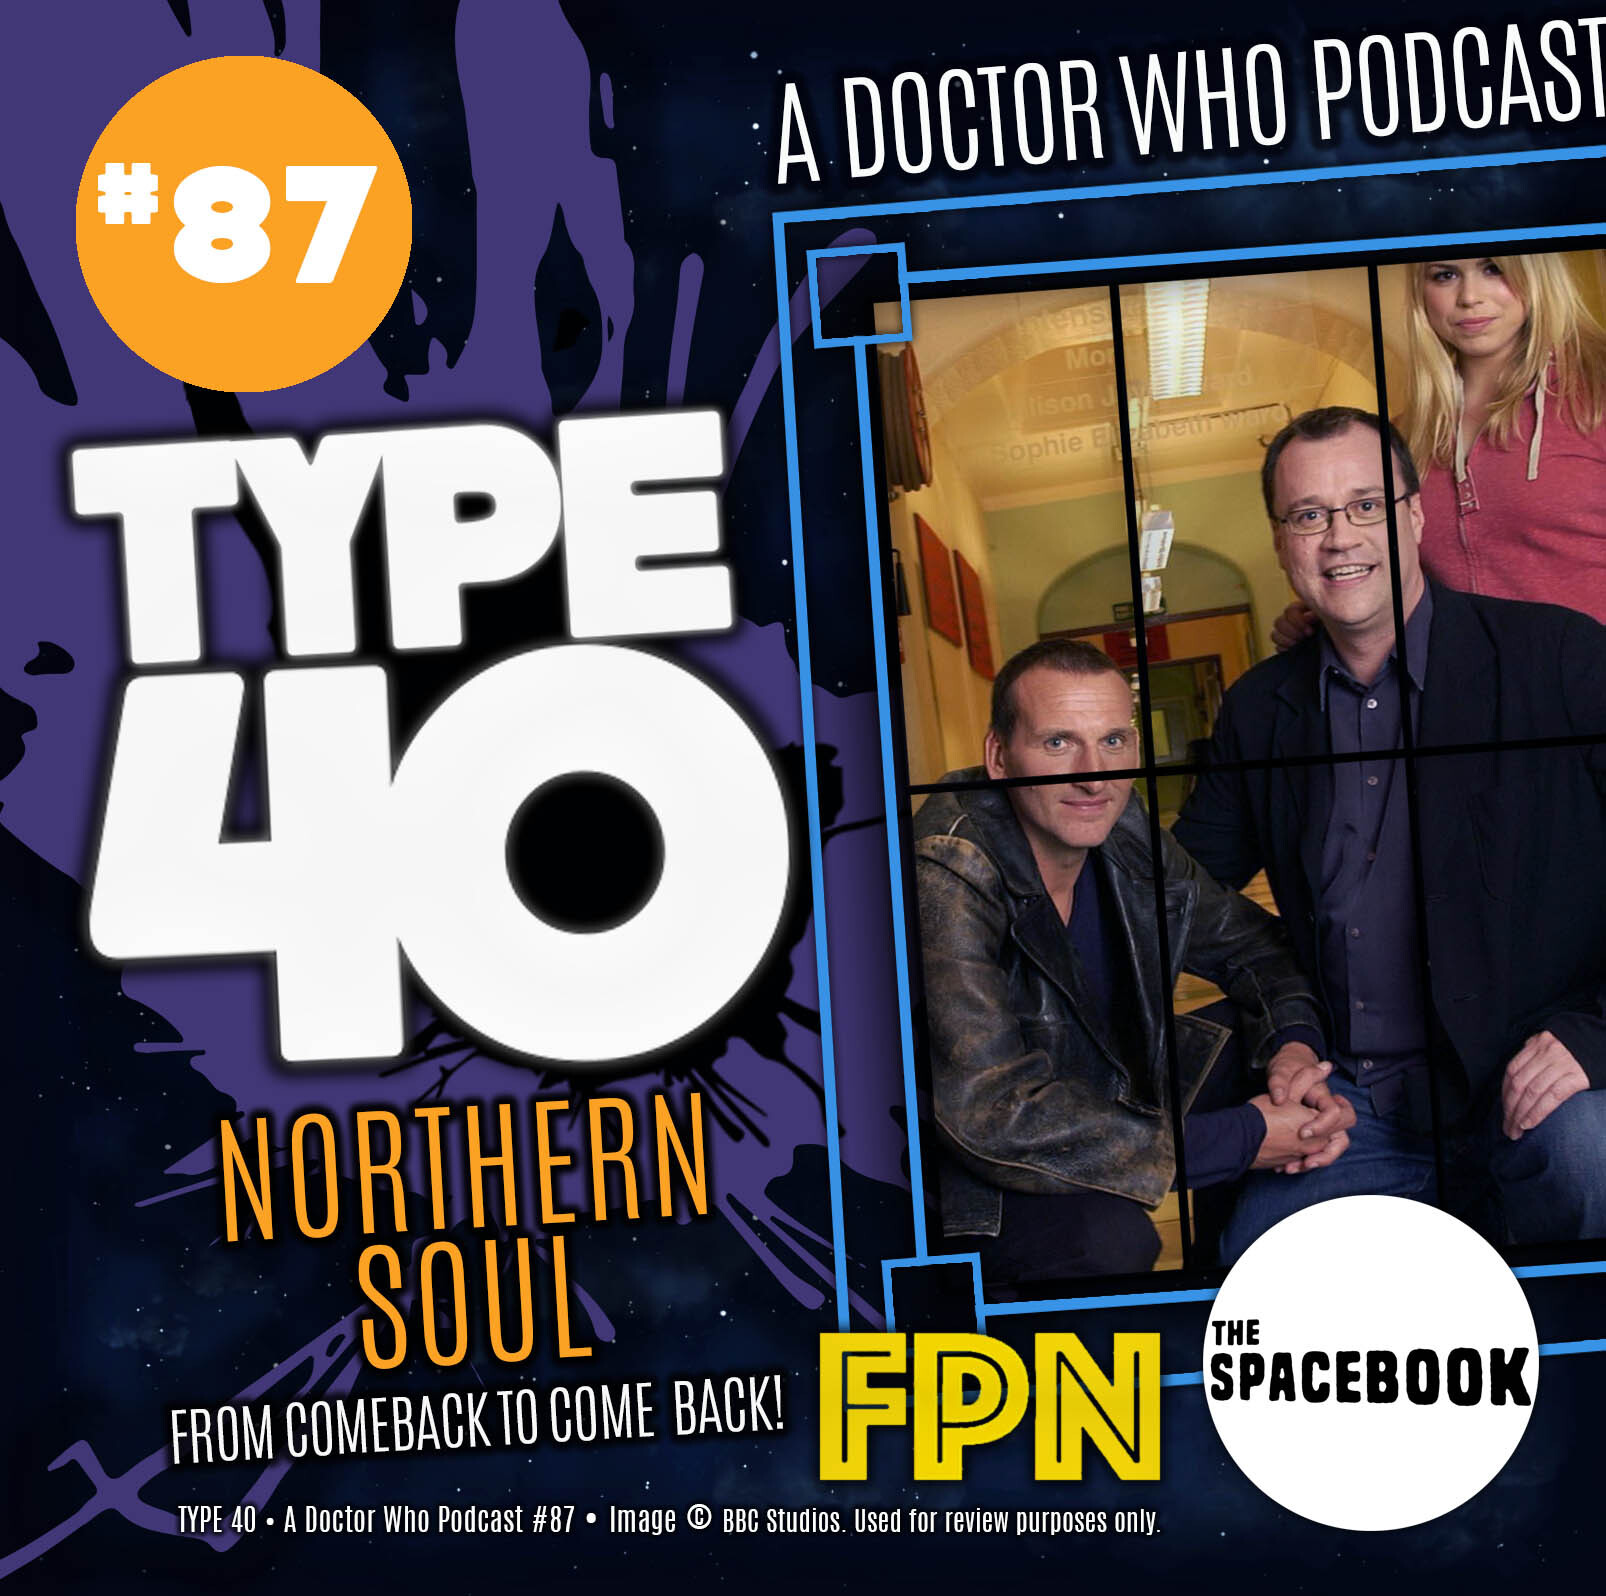 Type_40_Podcast_-_Ep87_NORTHERN_SOUL_SMALLER7...